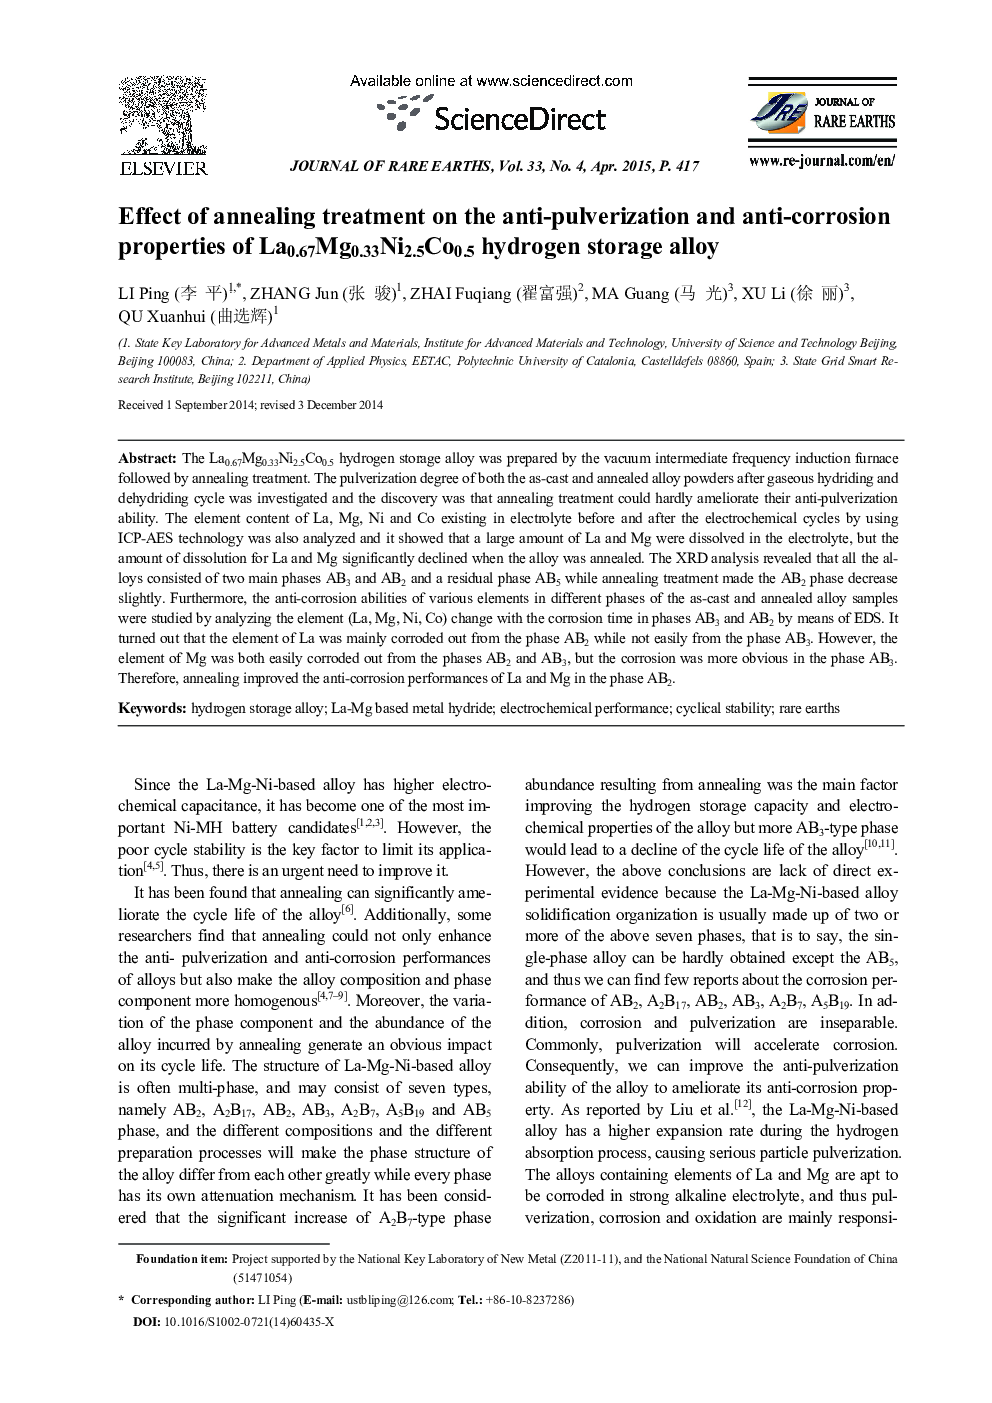 Effect of annealing treatment on the anti-pulverization and anti-corrosion properties of La0.67Mg0.33Ni2.5Co0.5 hydrogen storage alloy 